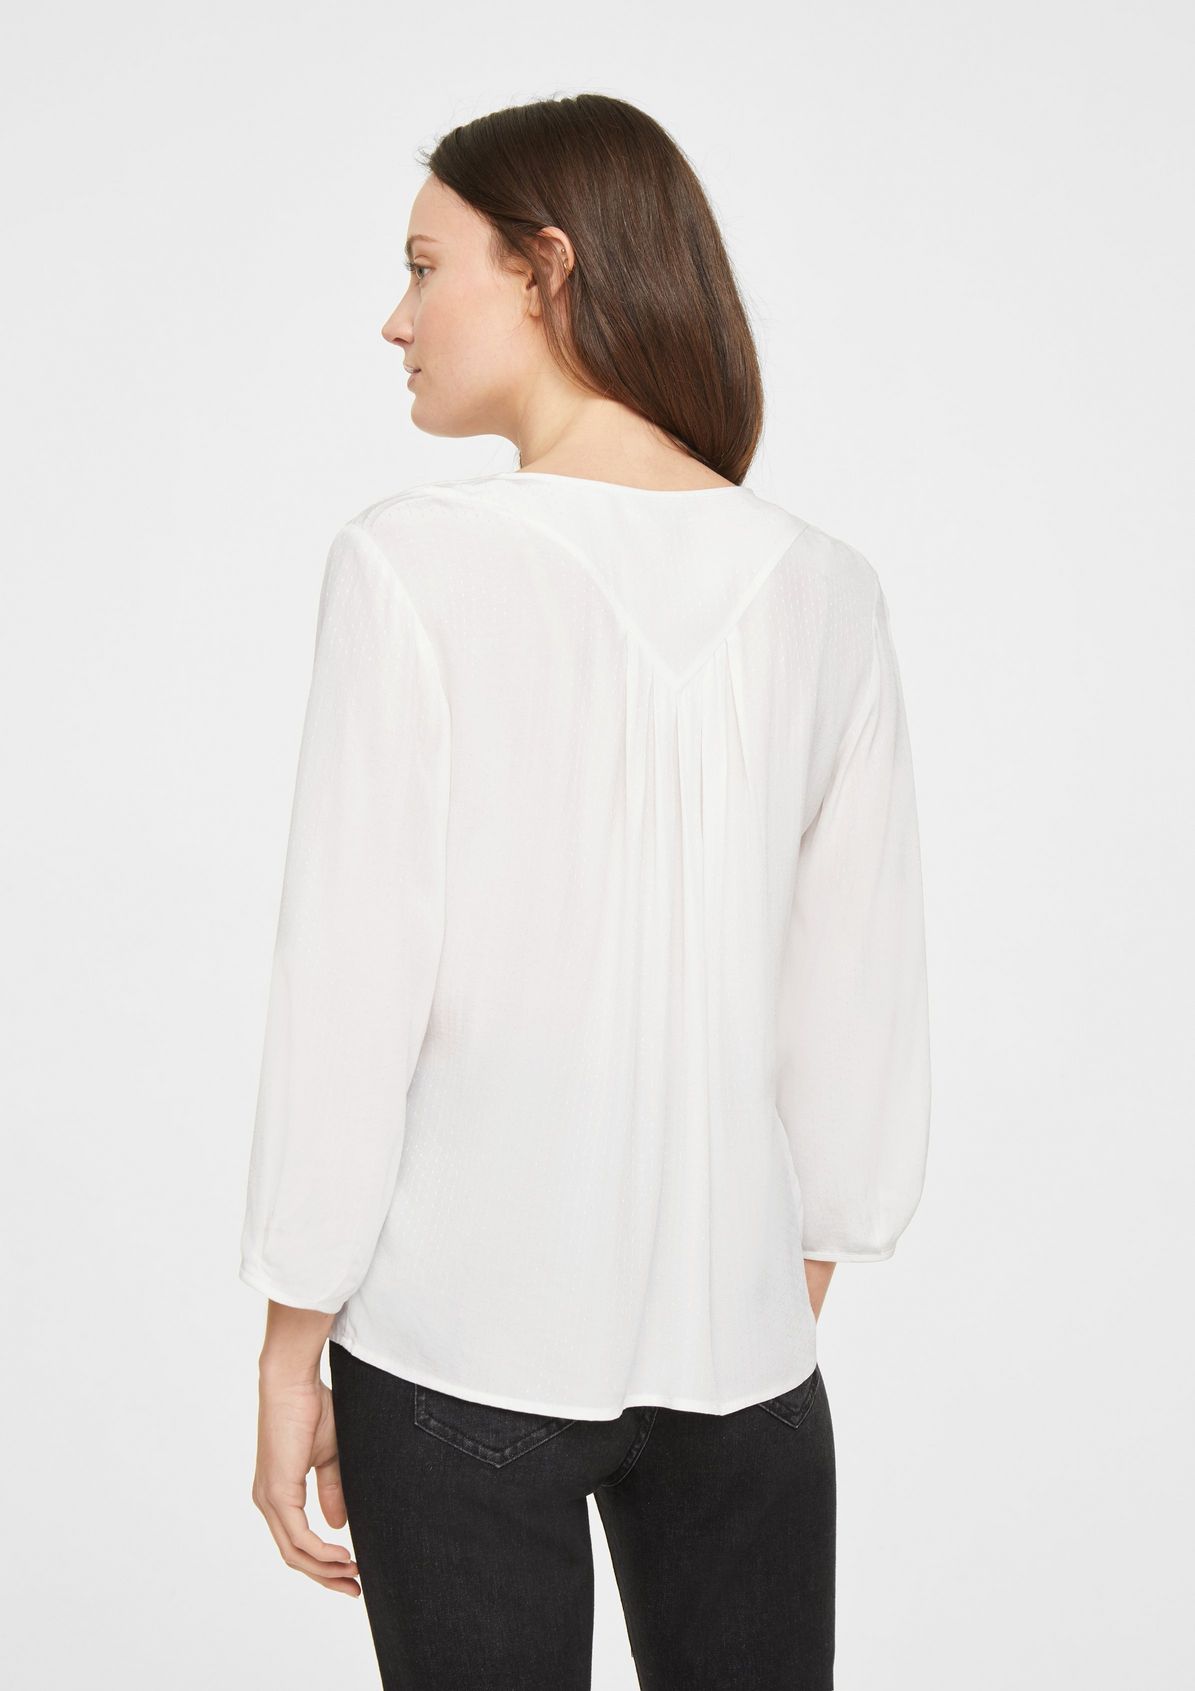 3/4 sleeve blouse with a decorative button placket from comma